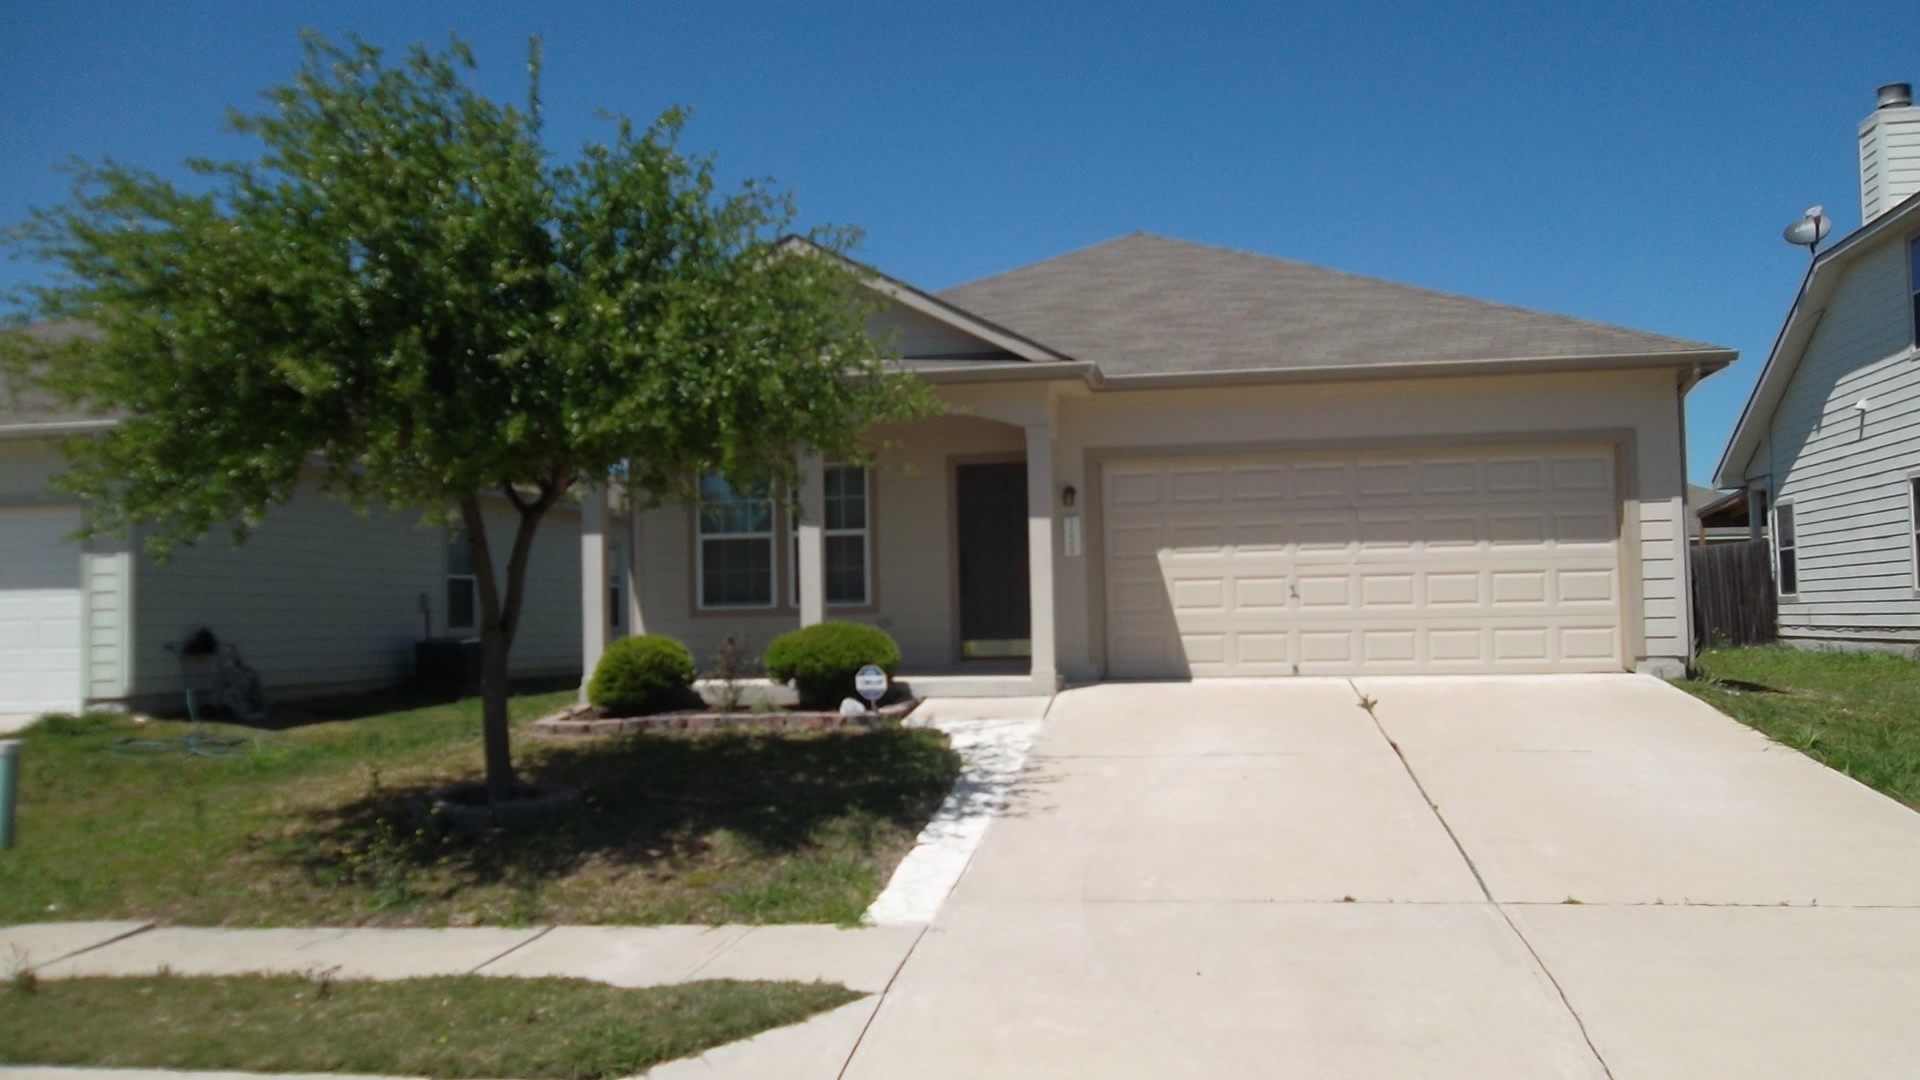 Great updated 3/2/2 home in Wildhorse Creek Ready for Move In